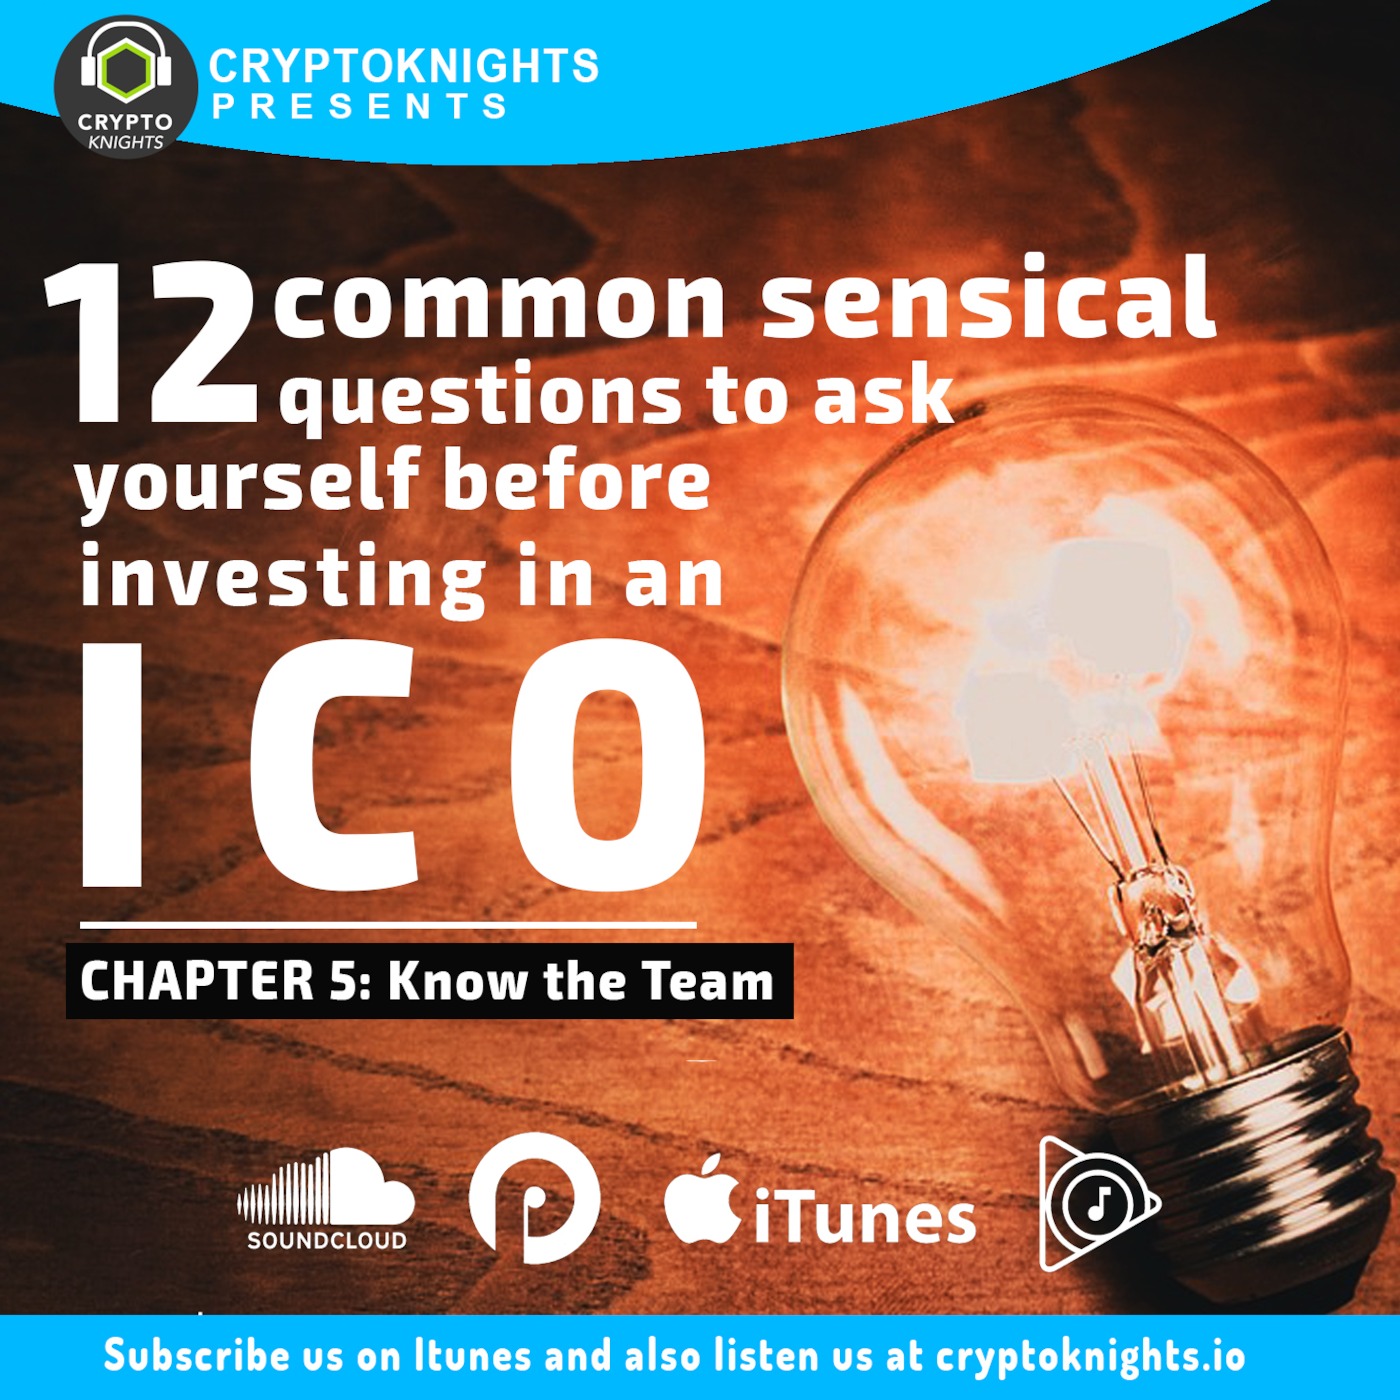 12 Common Sensical Questions to Ask Yourself Before Investing in an ICO. Chapter 5- Know the Team